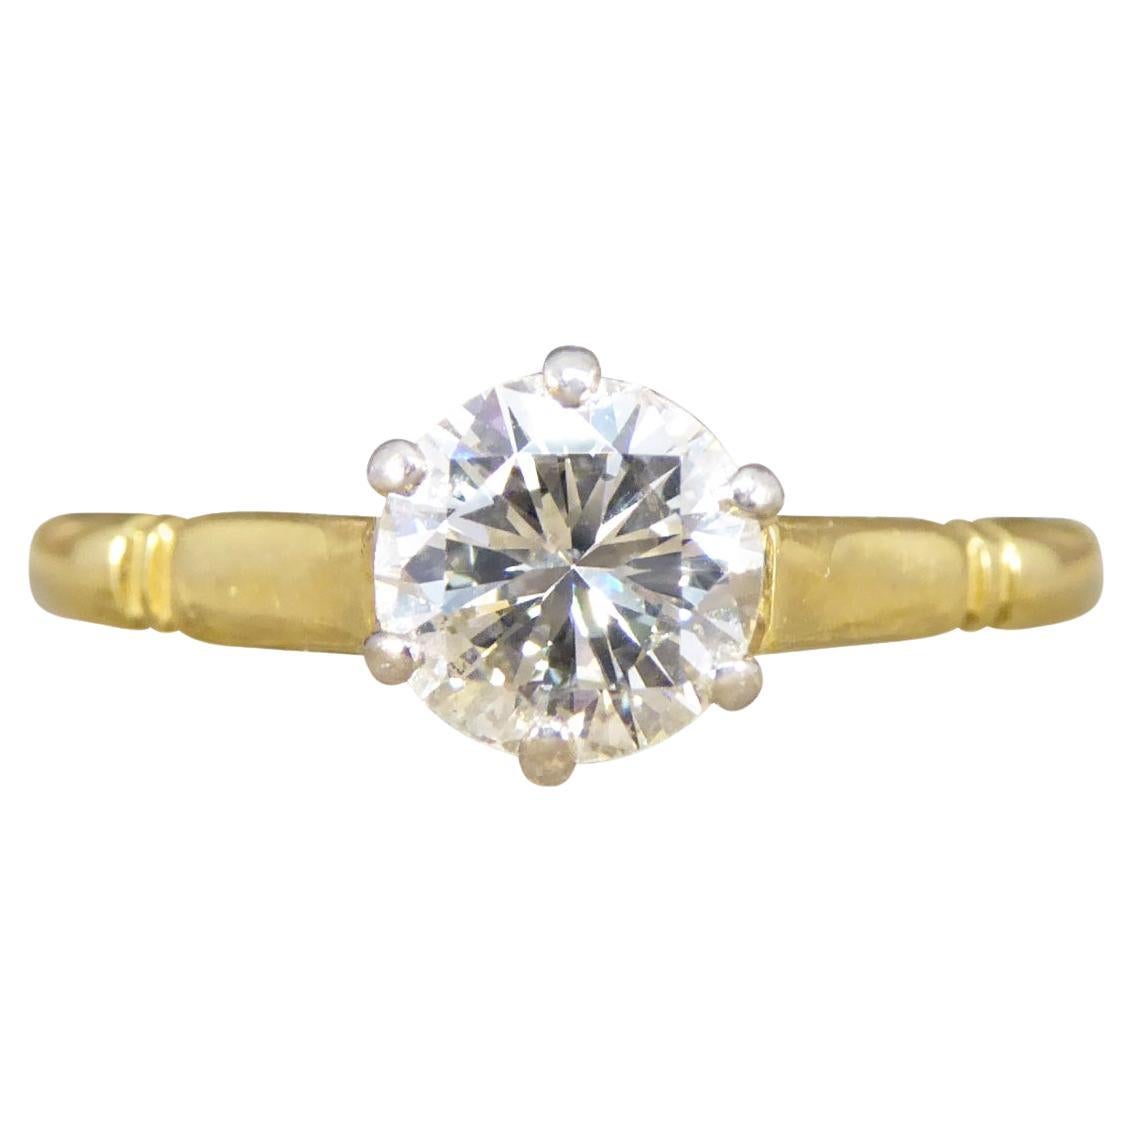 Vintage 0.82ct Diamond Solitaire Ring in 18ct Yellow Gold